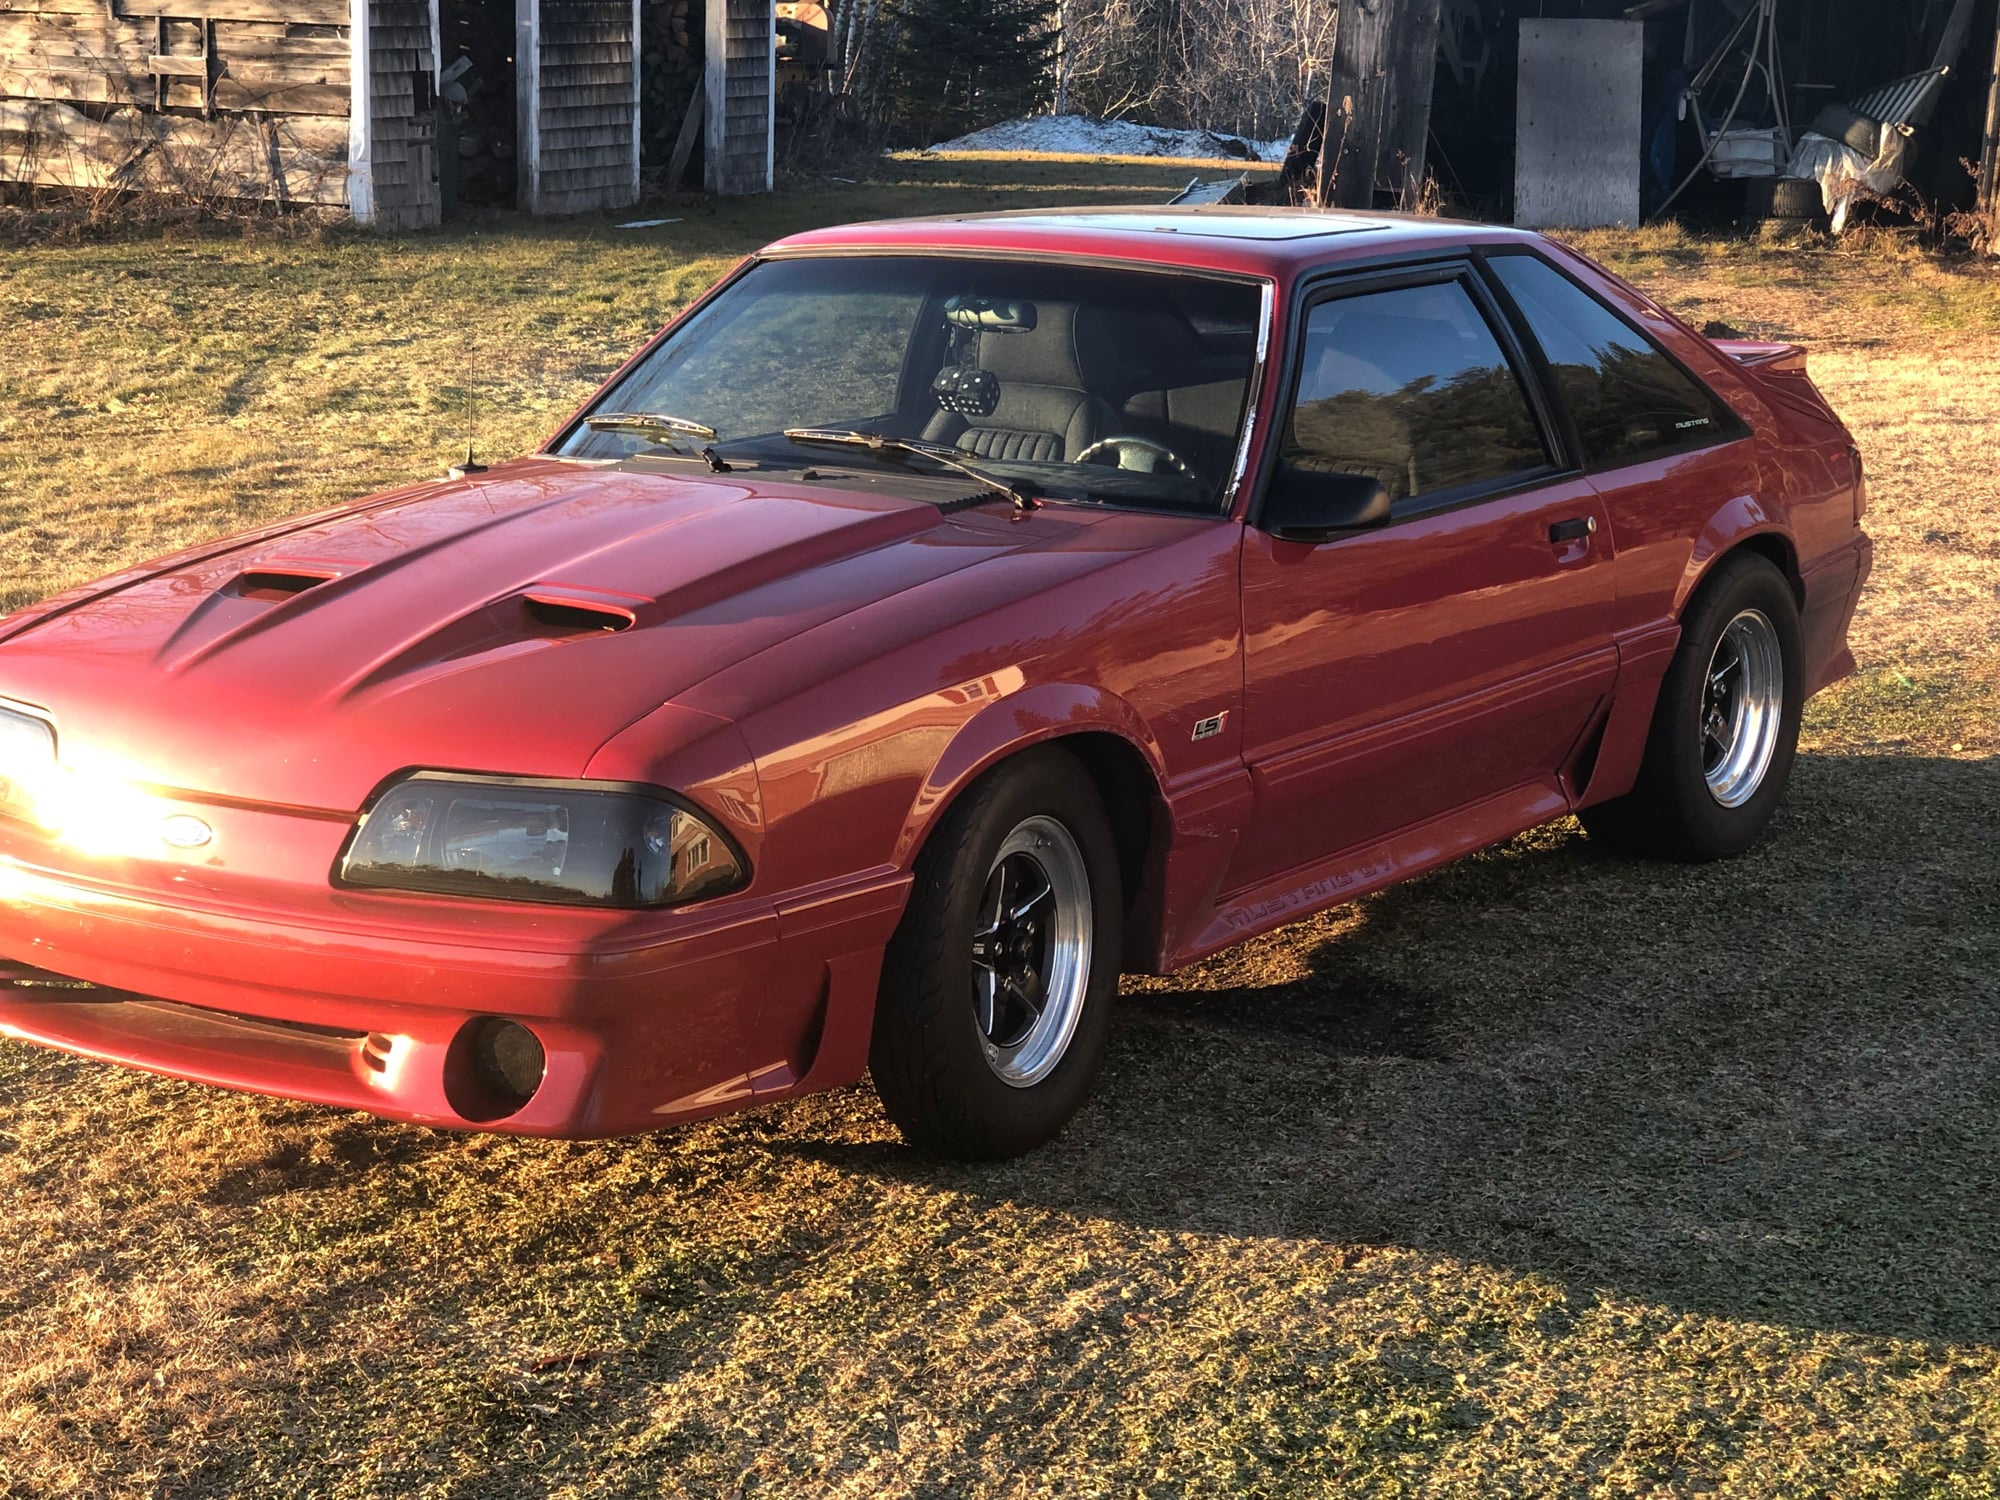 1988 Ford Mustang - 1988 Ford Mustang cammed ls1 lots of goodies - Used - VIN 1fabp42e4jf149794 - 55,000 Miles - 8 cyl - 2WD - Manual - Hatchback - Red - Bangor, ME 04401, United States